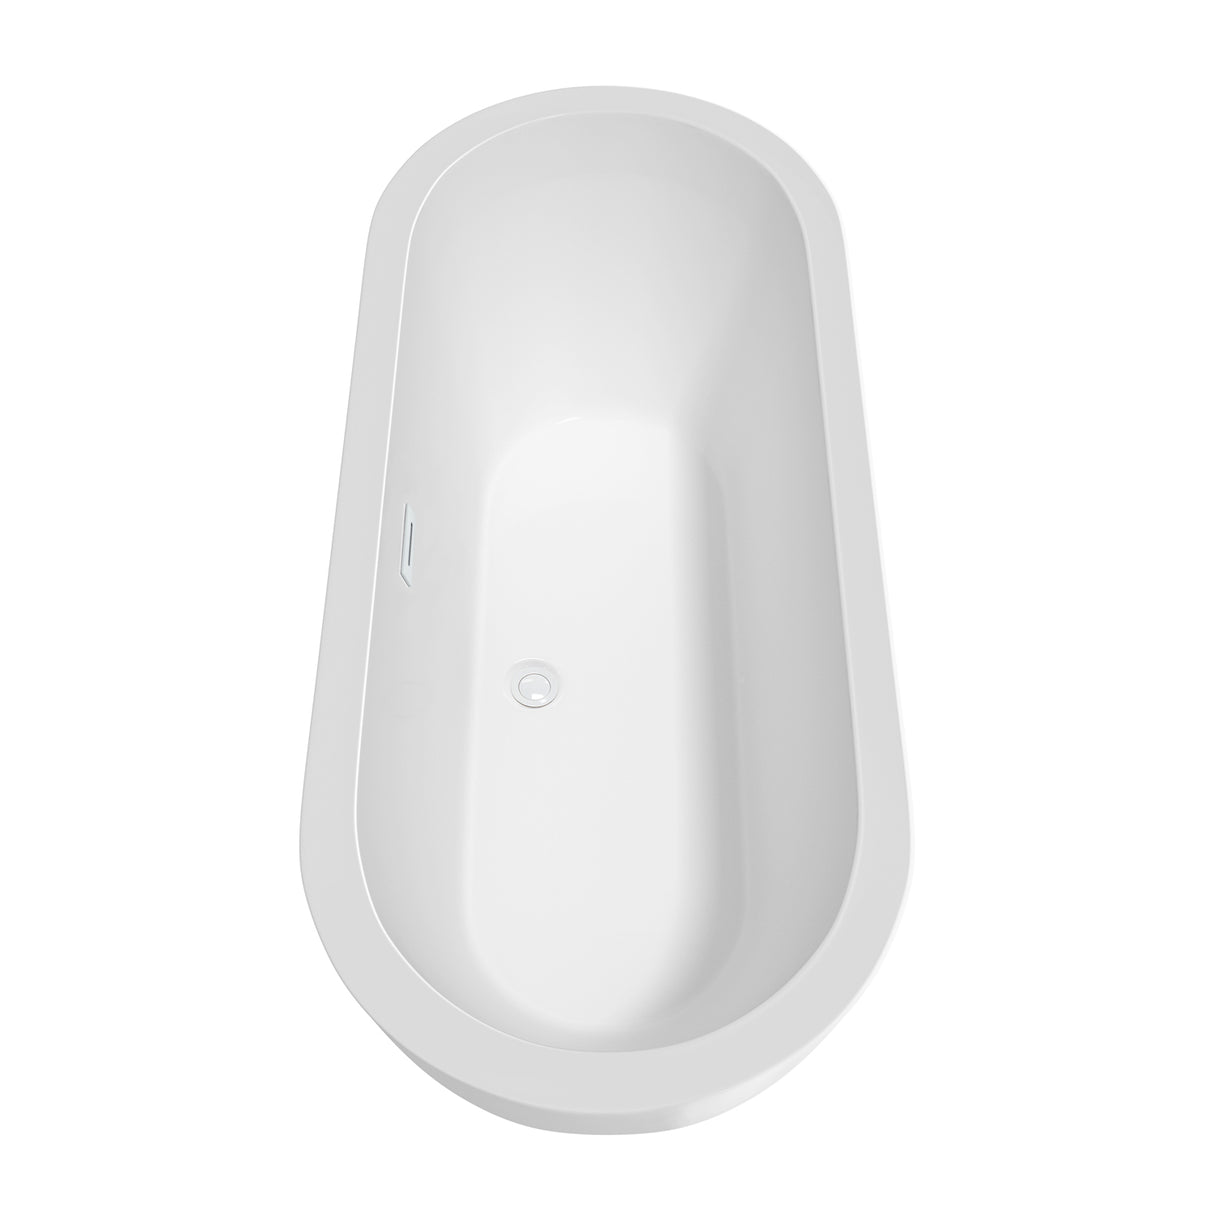 Soho 72 Inch Freestanding Bathtub in White with Shiny White Drain and Overflow Trim